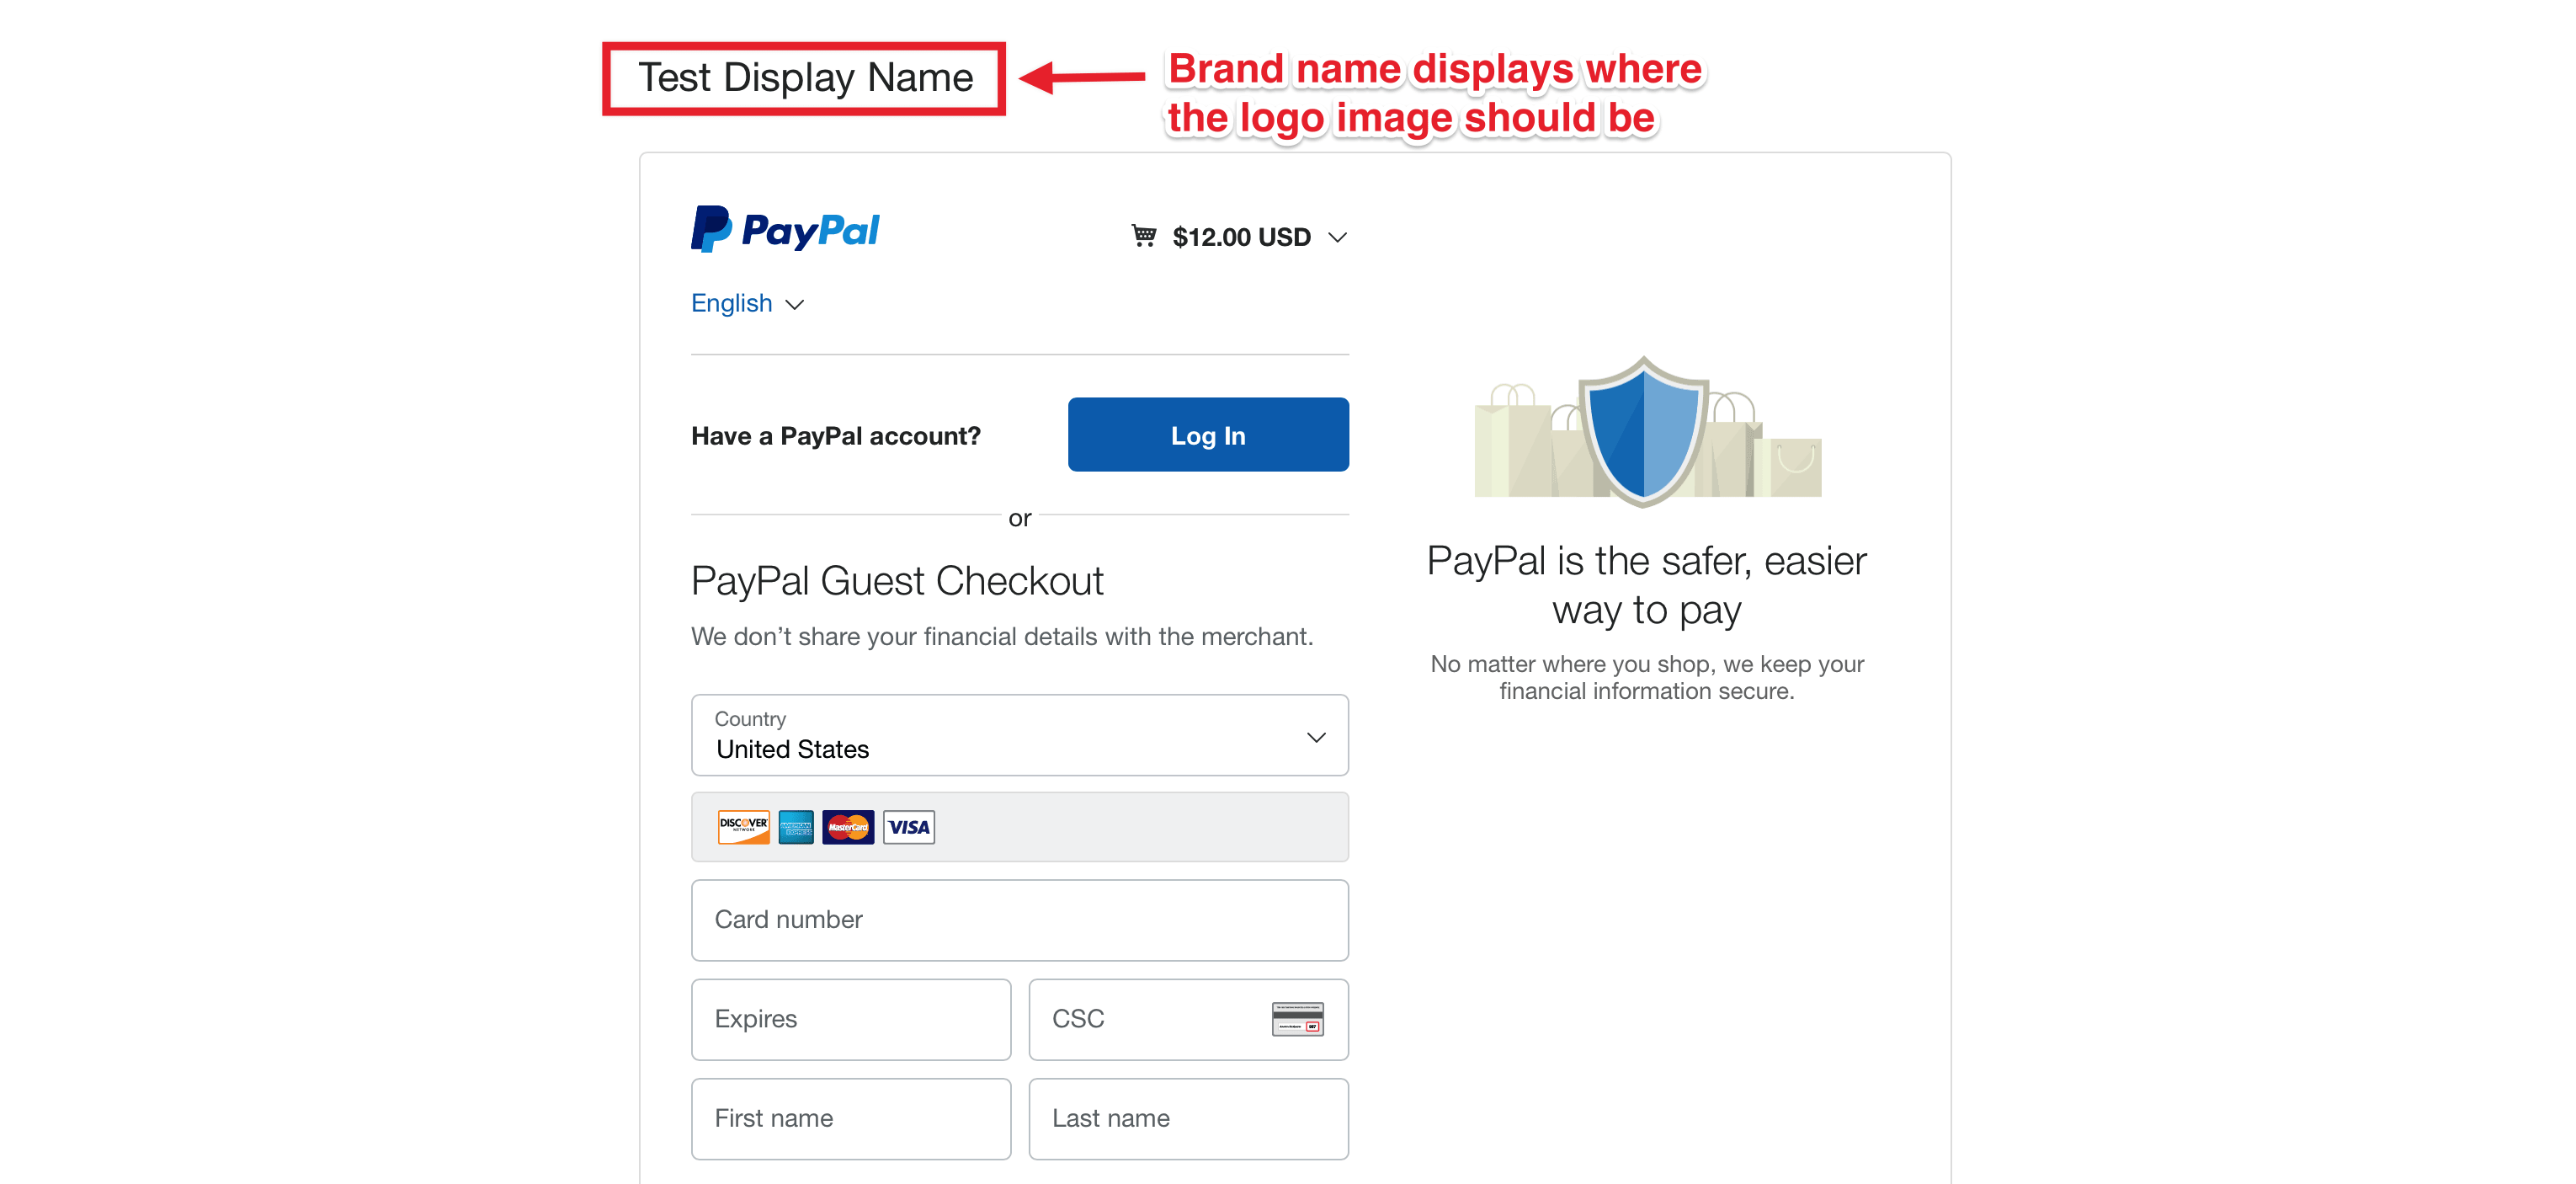 First PayPal Logo - Logo Image not displaying in PayPal Checkout page · Issue #371 ...